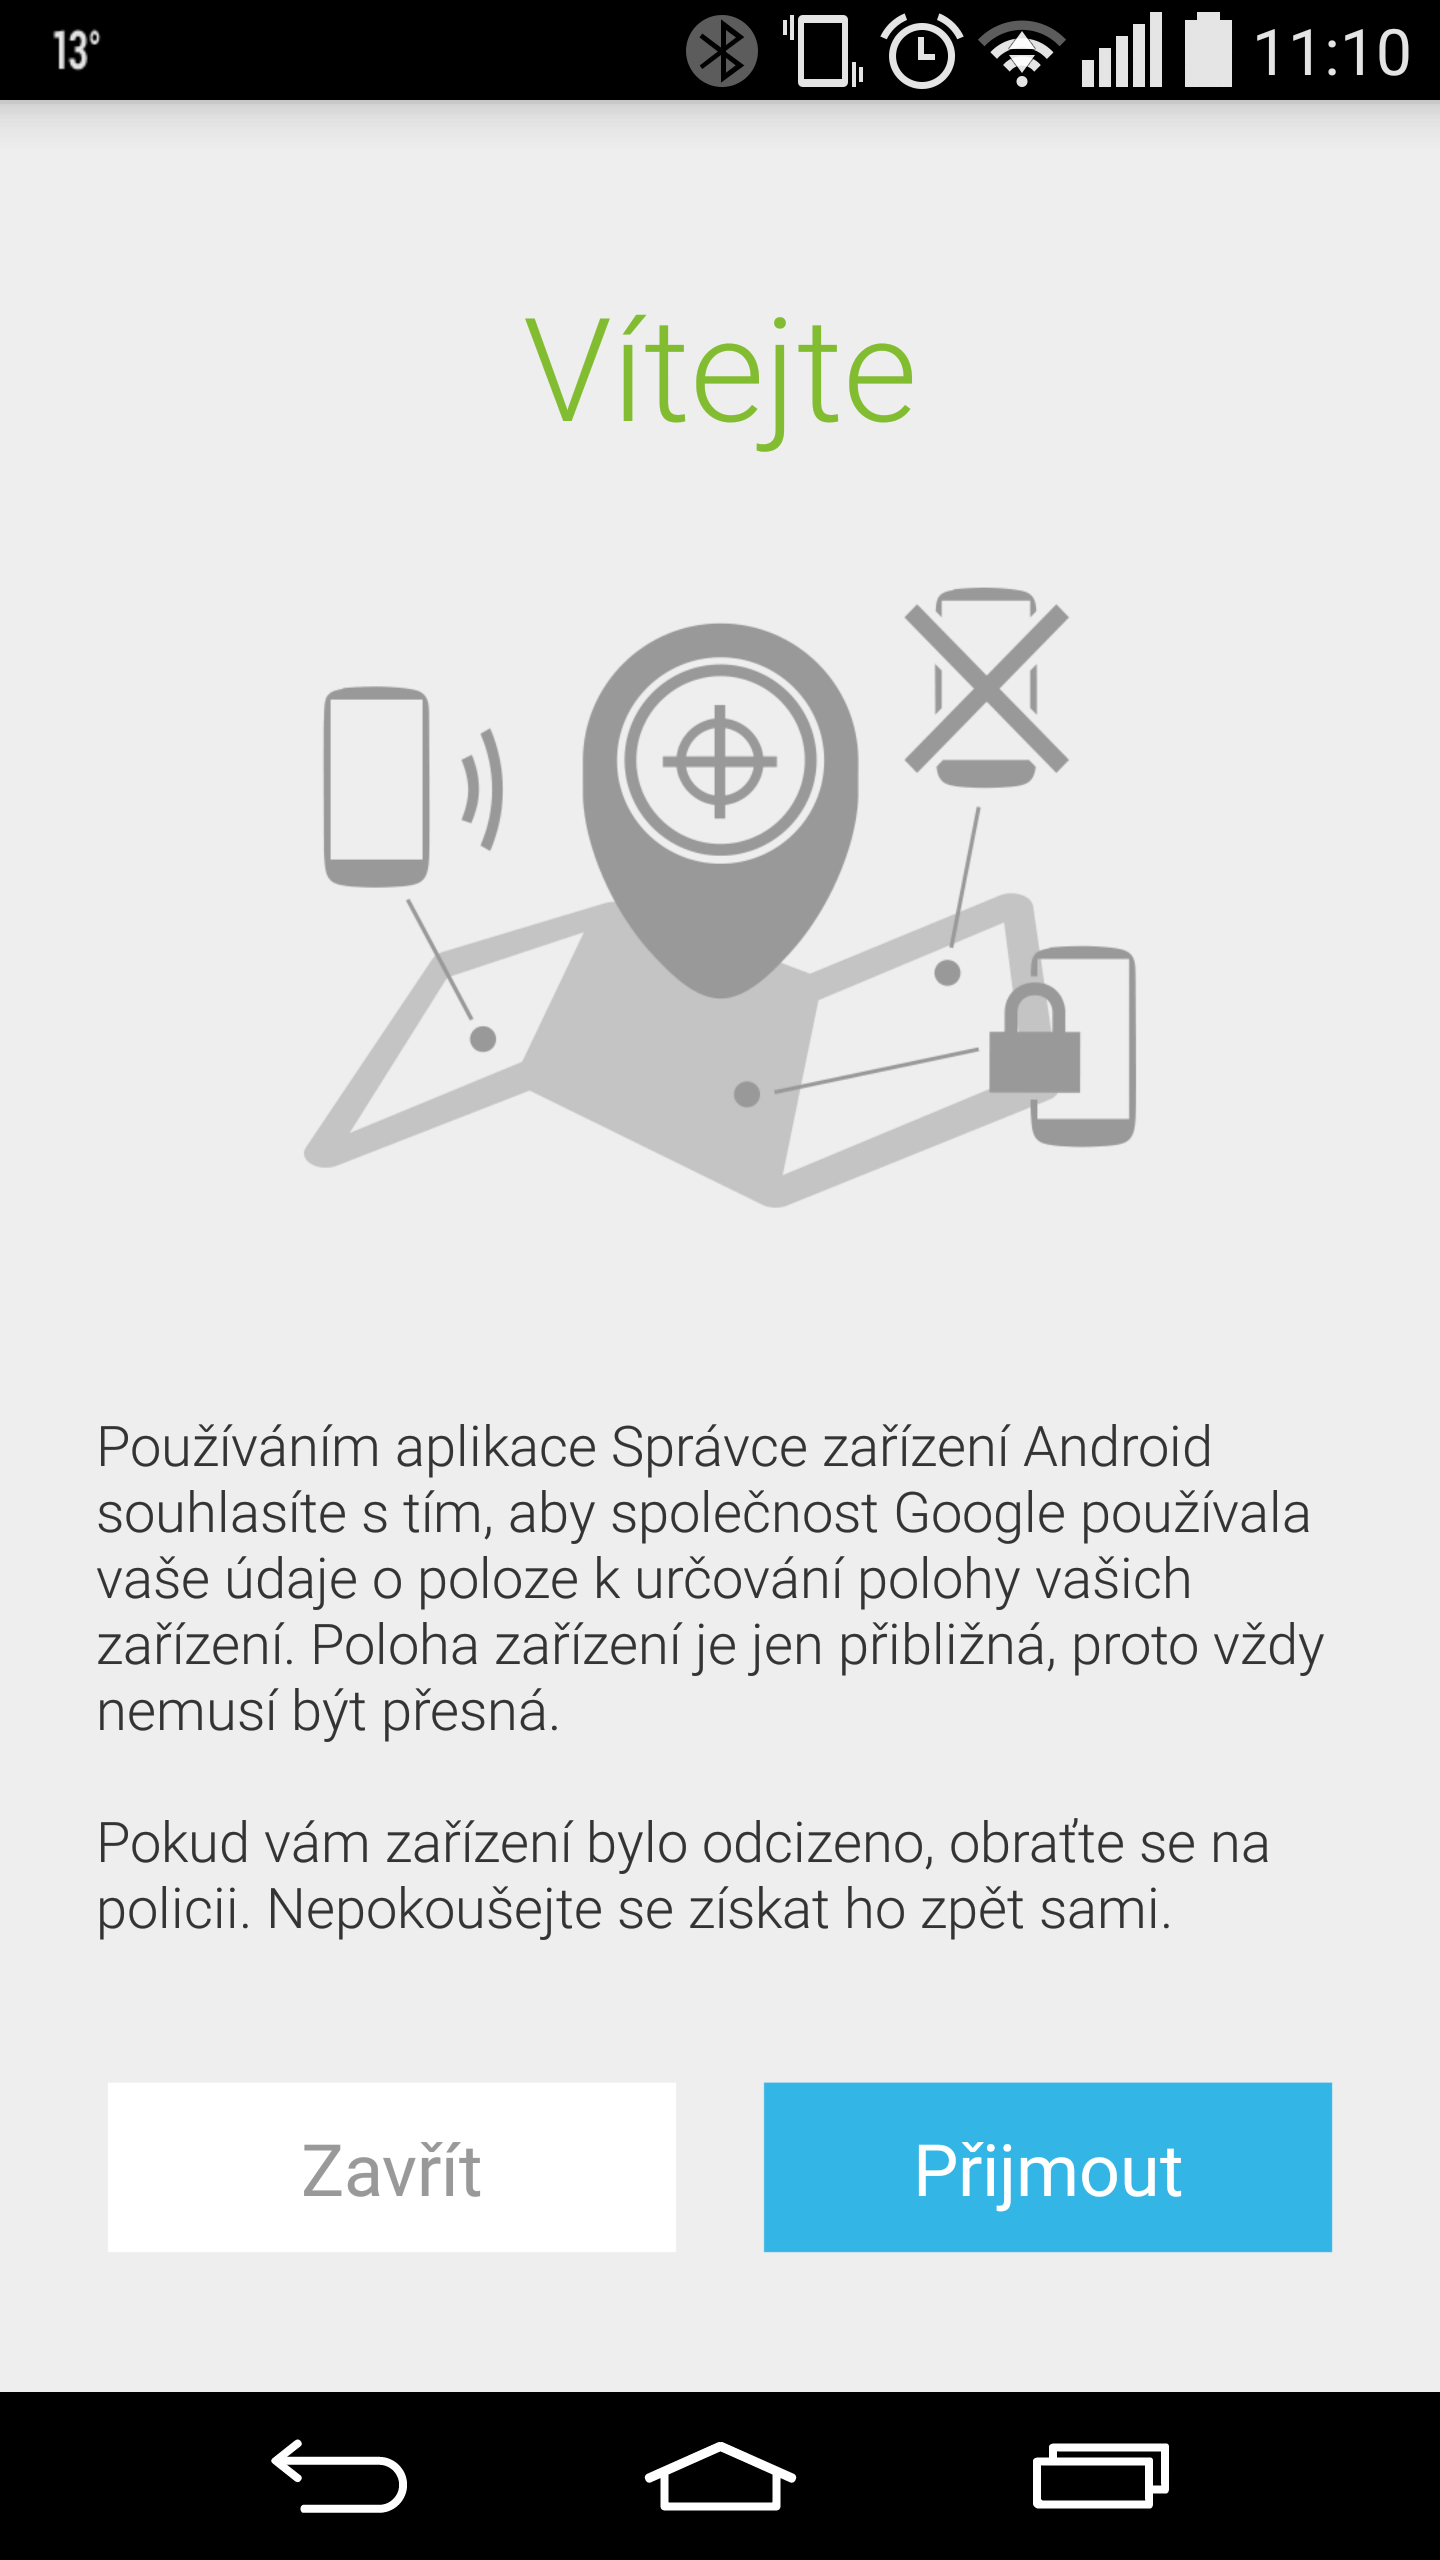 07 - Android Device Manager - uvodni informace